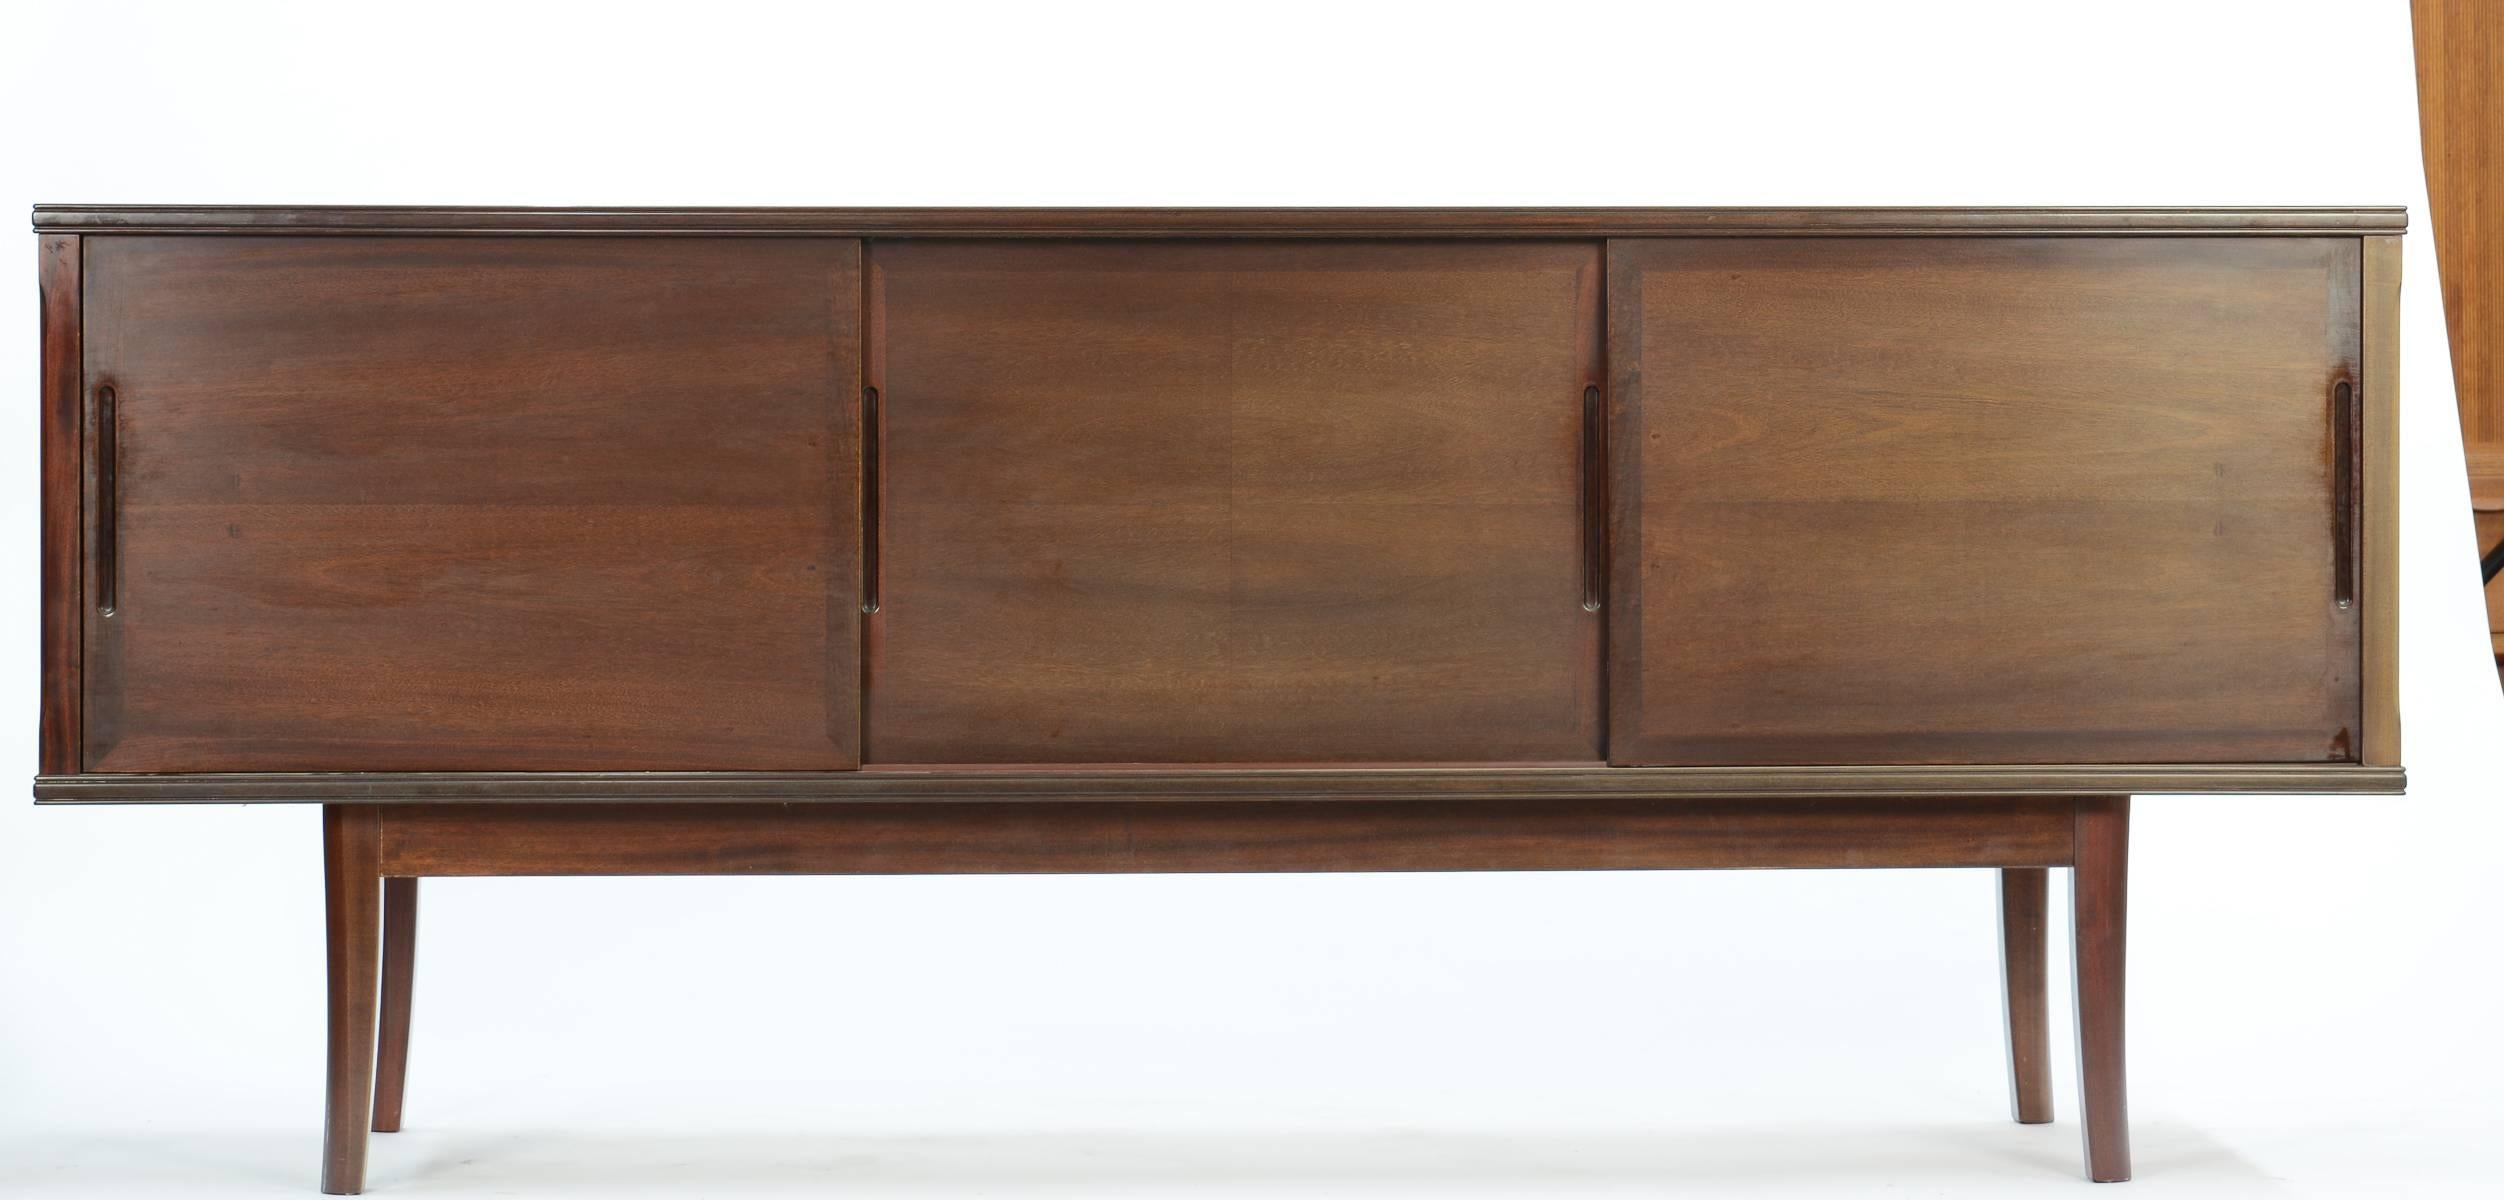 A grand sideboard in stunning solid mahogany by Danish master Ole Wanscher. Three sliding doors reveal two shelves on the left, two felted doors center and one shelf right. Grooved detail top and bottom adds unusual elegance.

Ole Wanscher